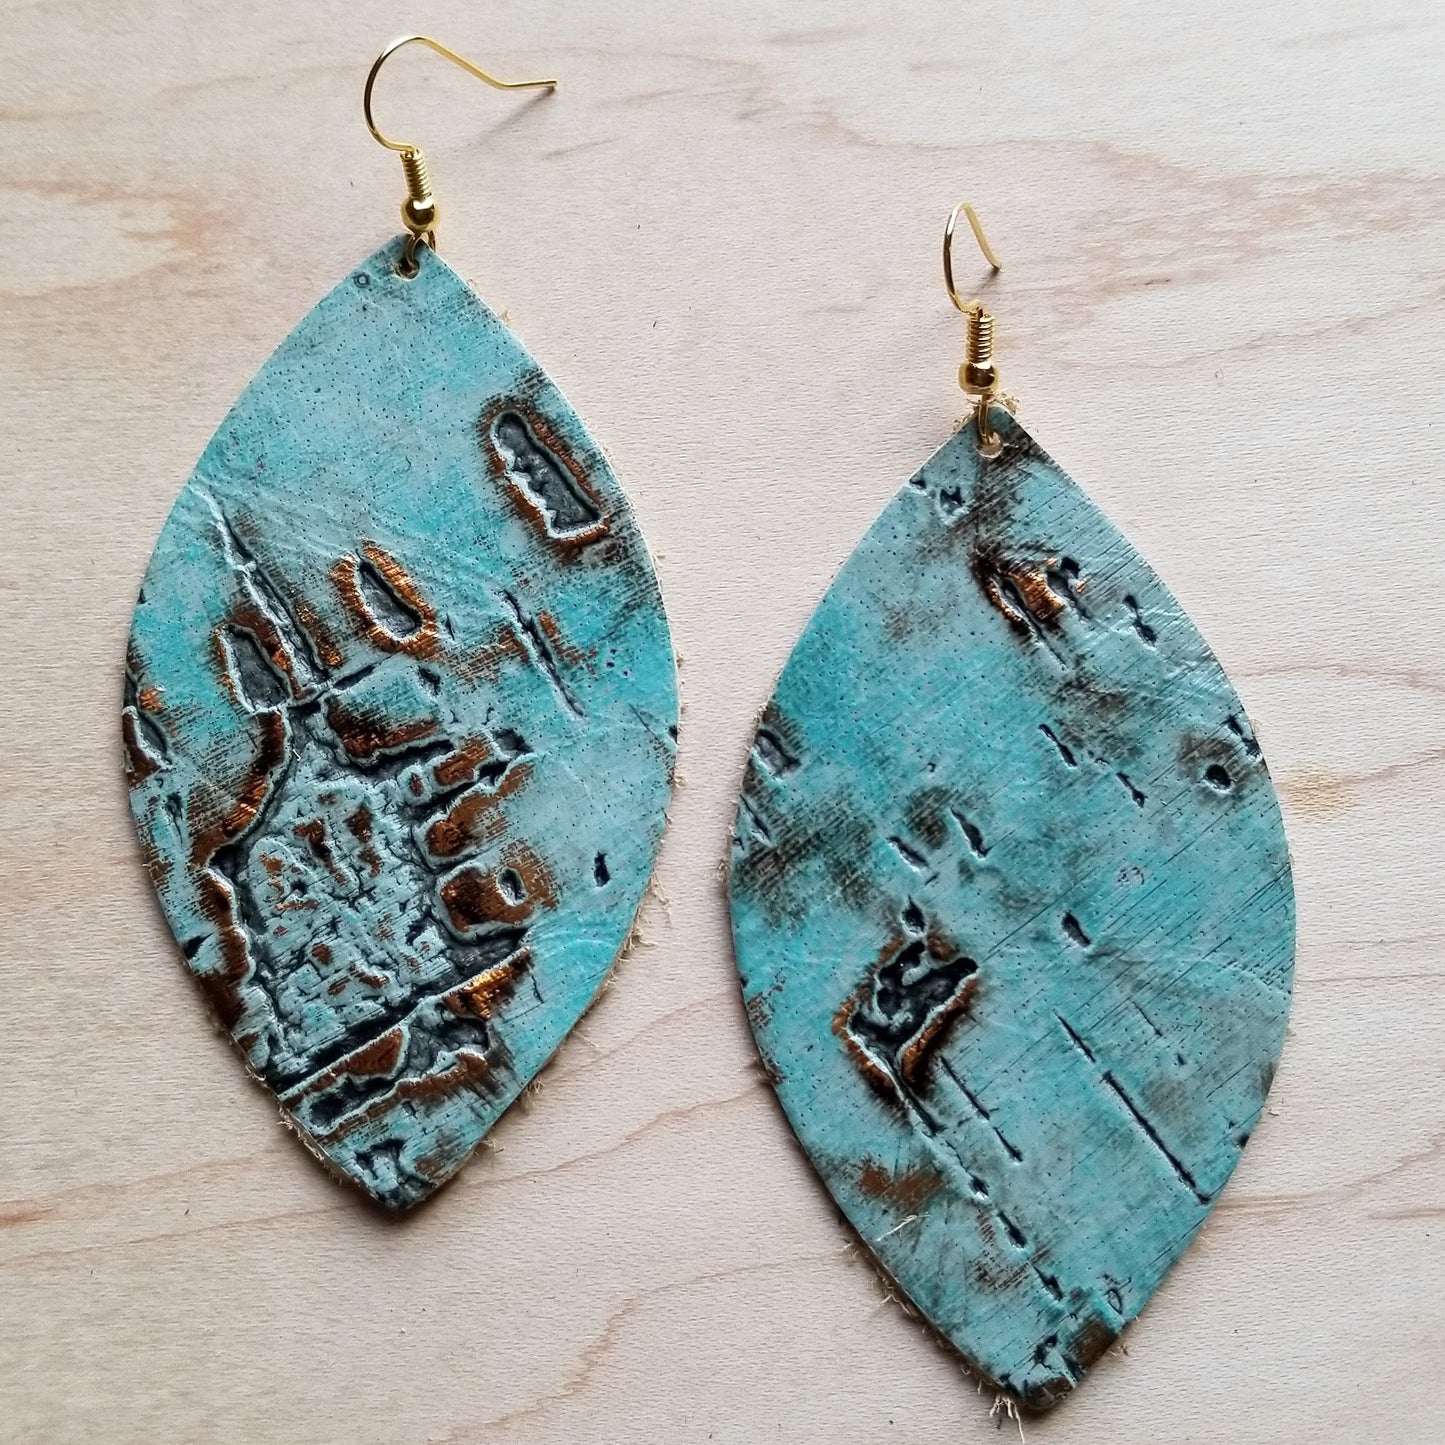 Leather Oval Earrings in Turquoise Metallic 222L - The Jewelry Junkie